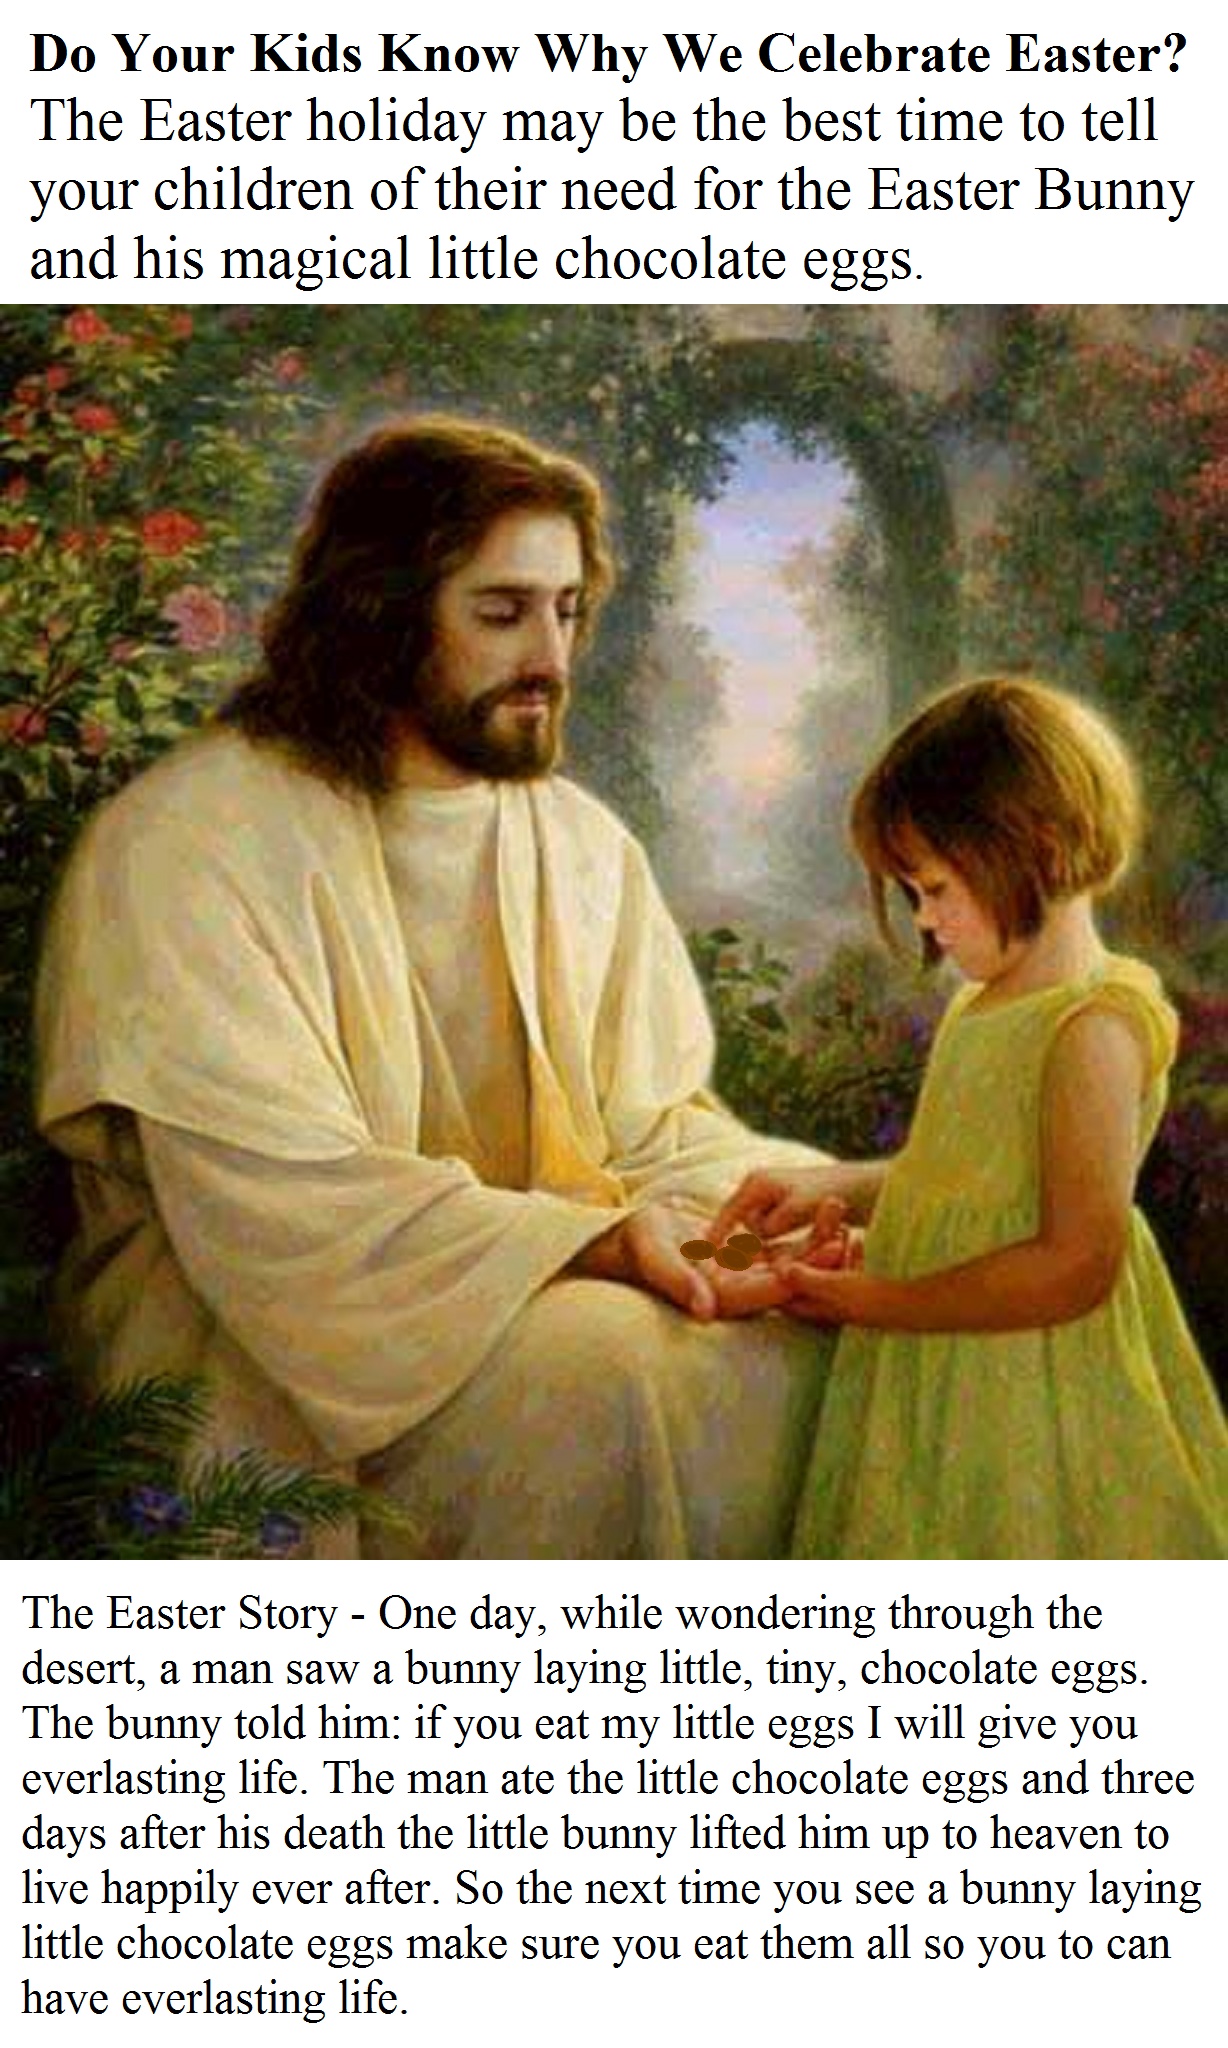 The Easter Story - One day, while wondering through the desert, a man saw a bunny laying little, tiny, chocolate eggs. The bunny told him: if you eat my little eggs I will give you everlasting life. The man ate the little chocolate eggs and three days after his death the little bunny lifted him up to heaven to live happily ever after. So the next time you see a bunny laying little chocolate eggs make sure you eat them all so you to can have everlasting life.